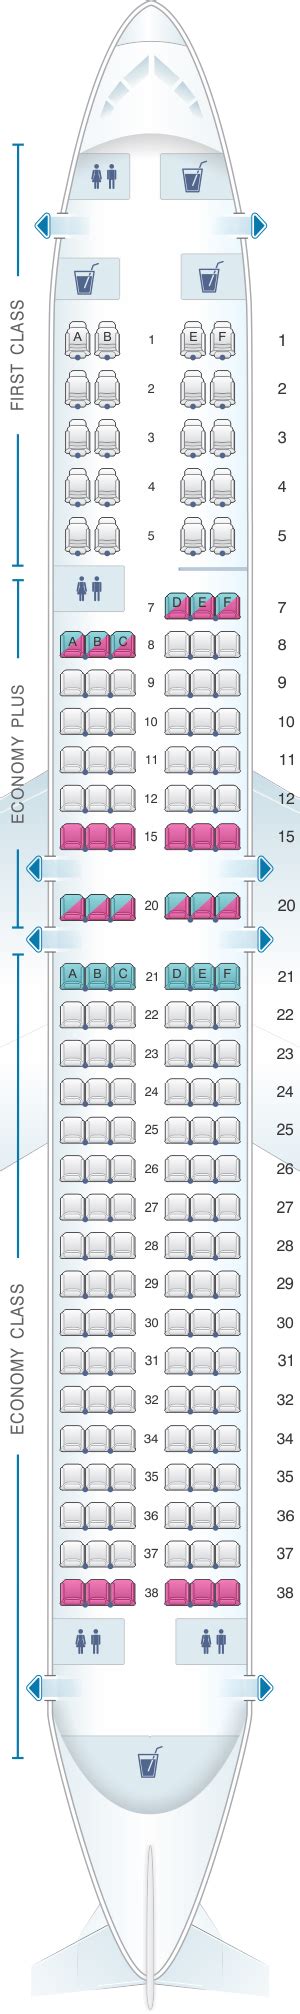 Boeing 737 900 United Airlines Seat Map Tutor Suhu